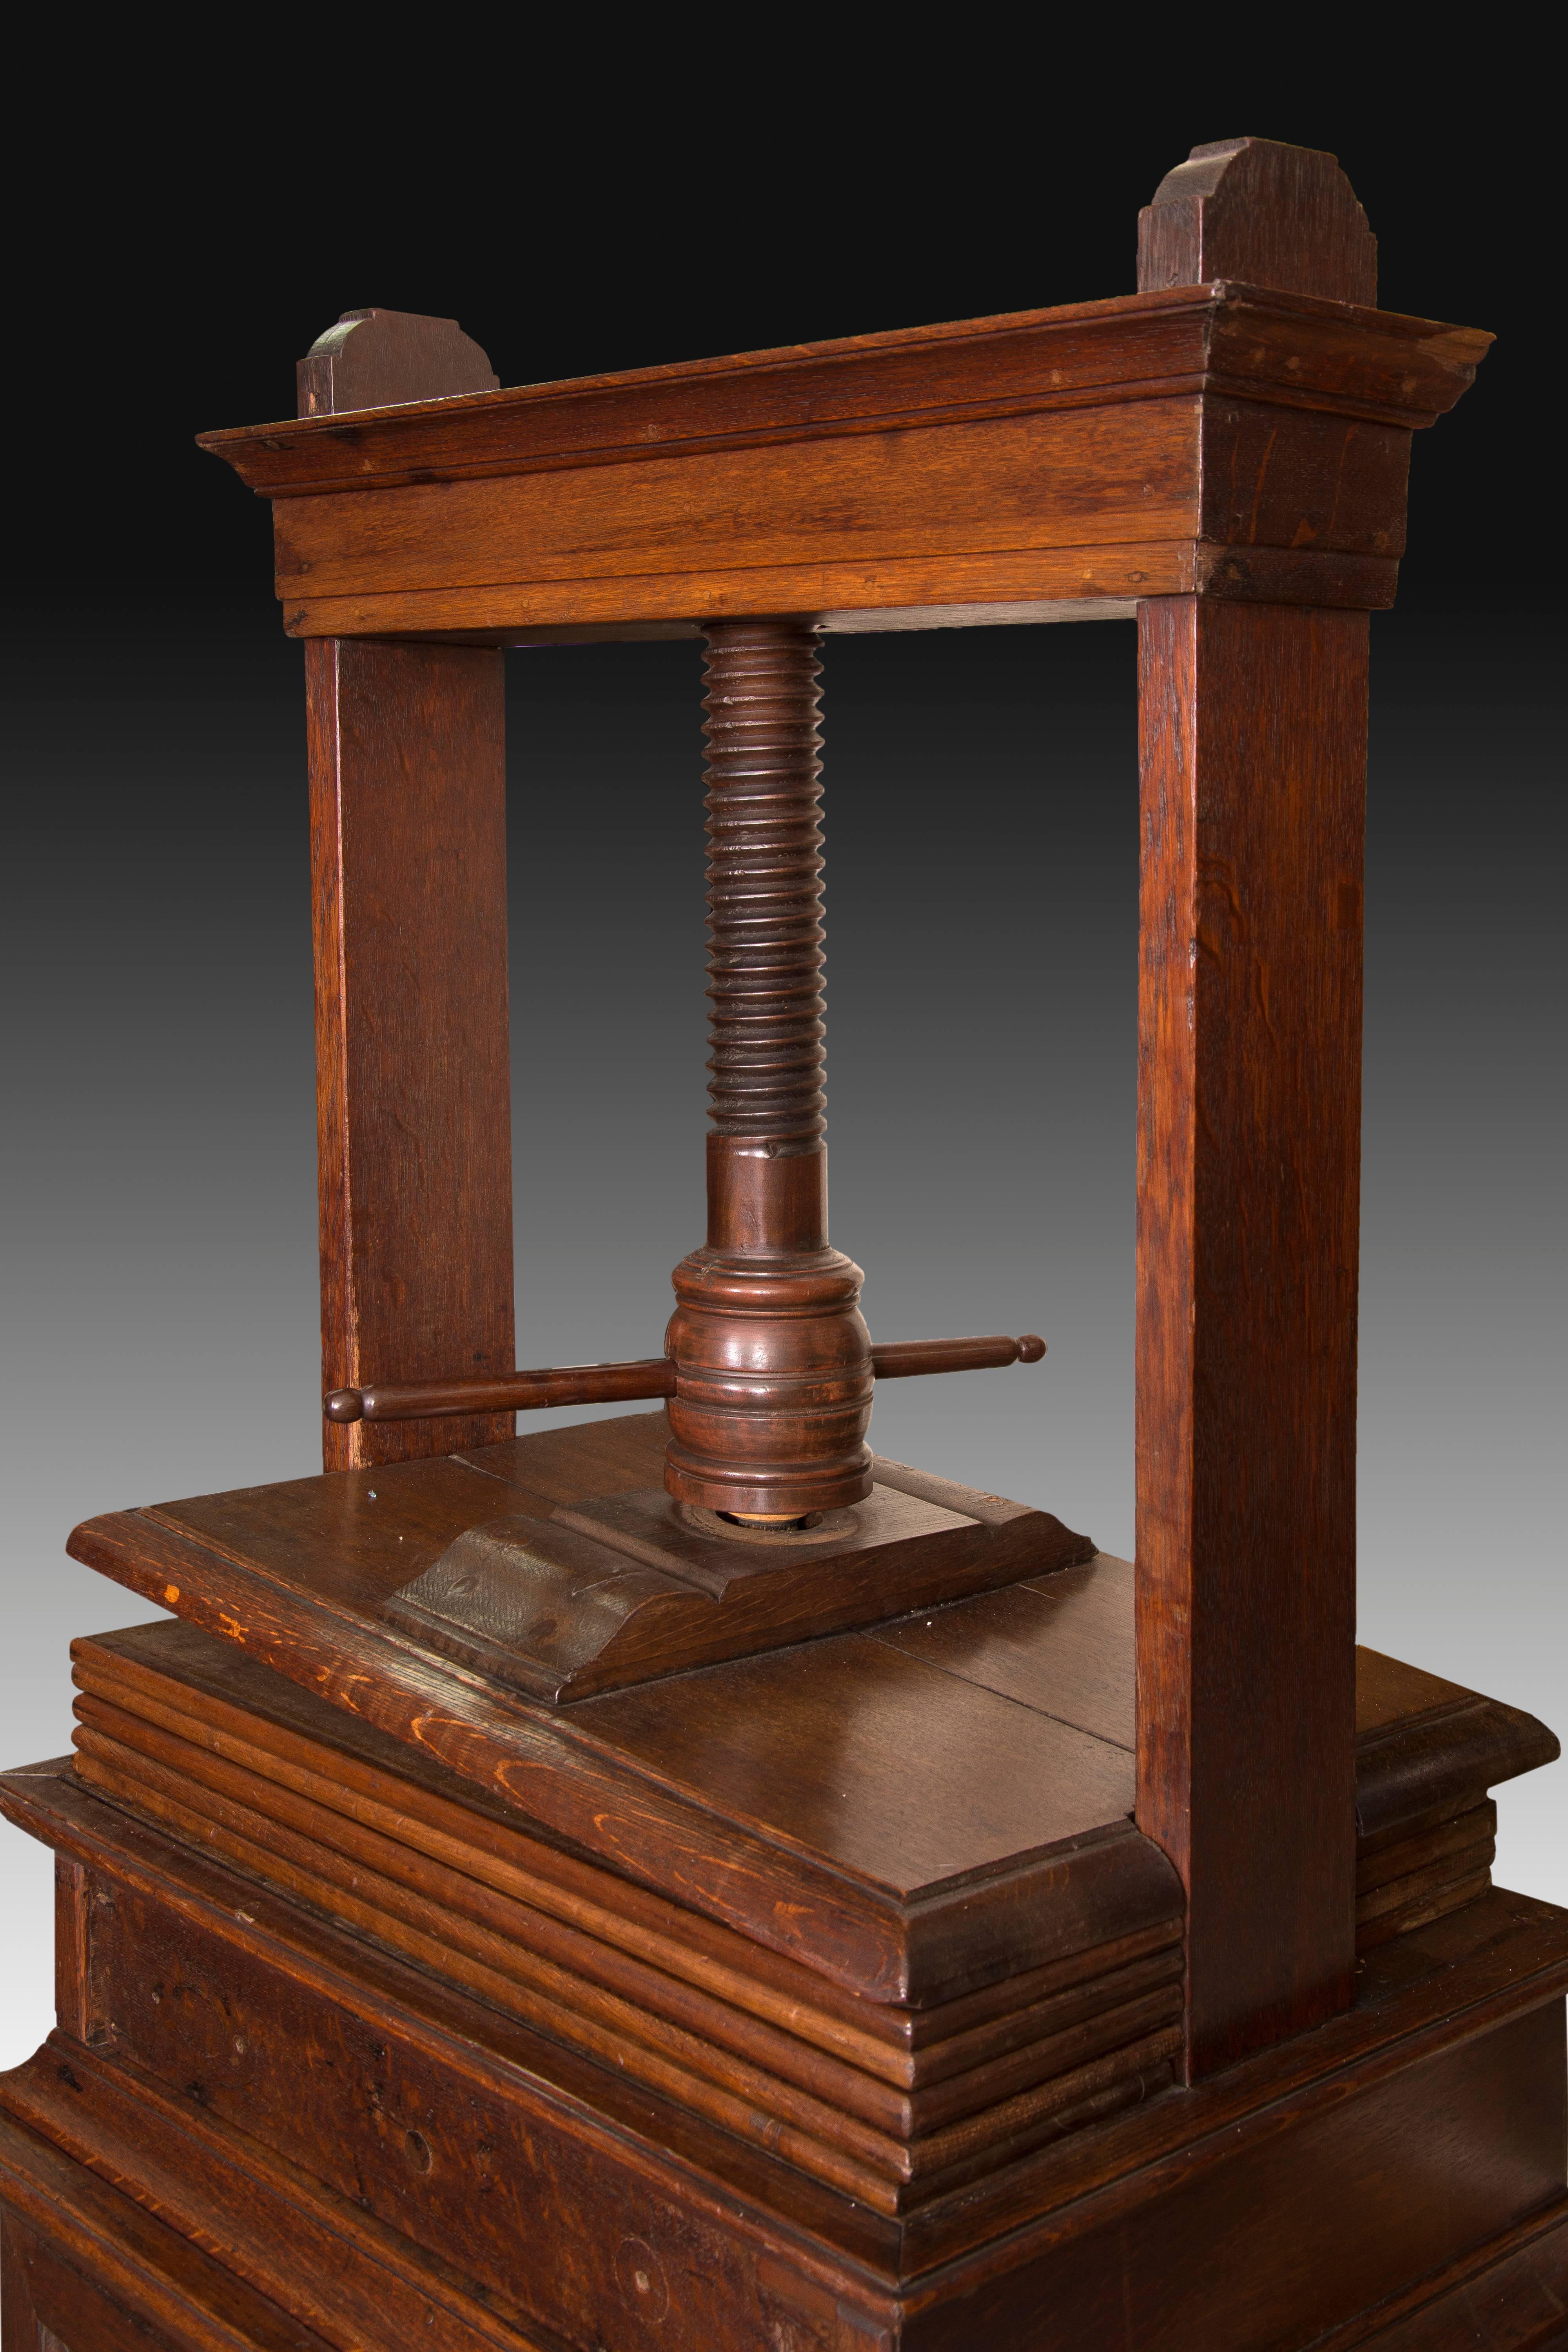 Clothing press in oak wood, Holland, 19th century. Garment press with closed cupboard in its lower part made of oak wood in Holland. As is normal in these utilitarian elements, it lacks decoration, and was used to straighten clothes. It is not usual